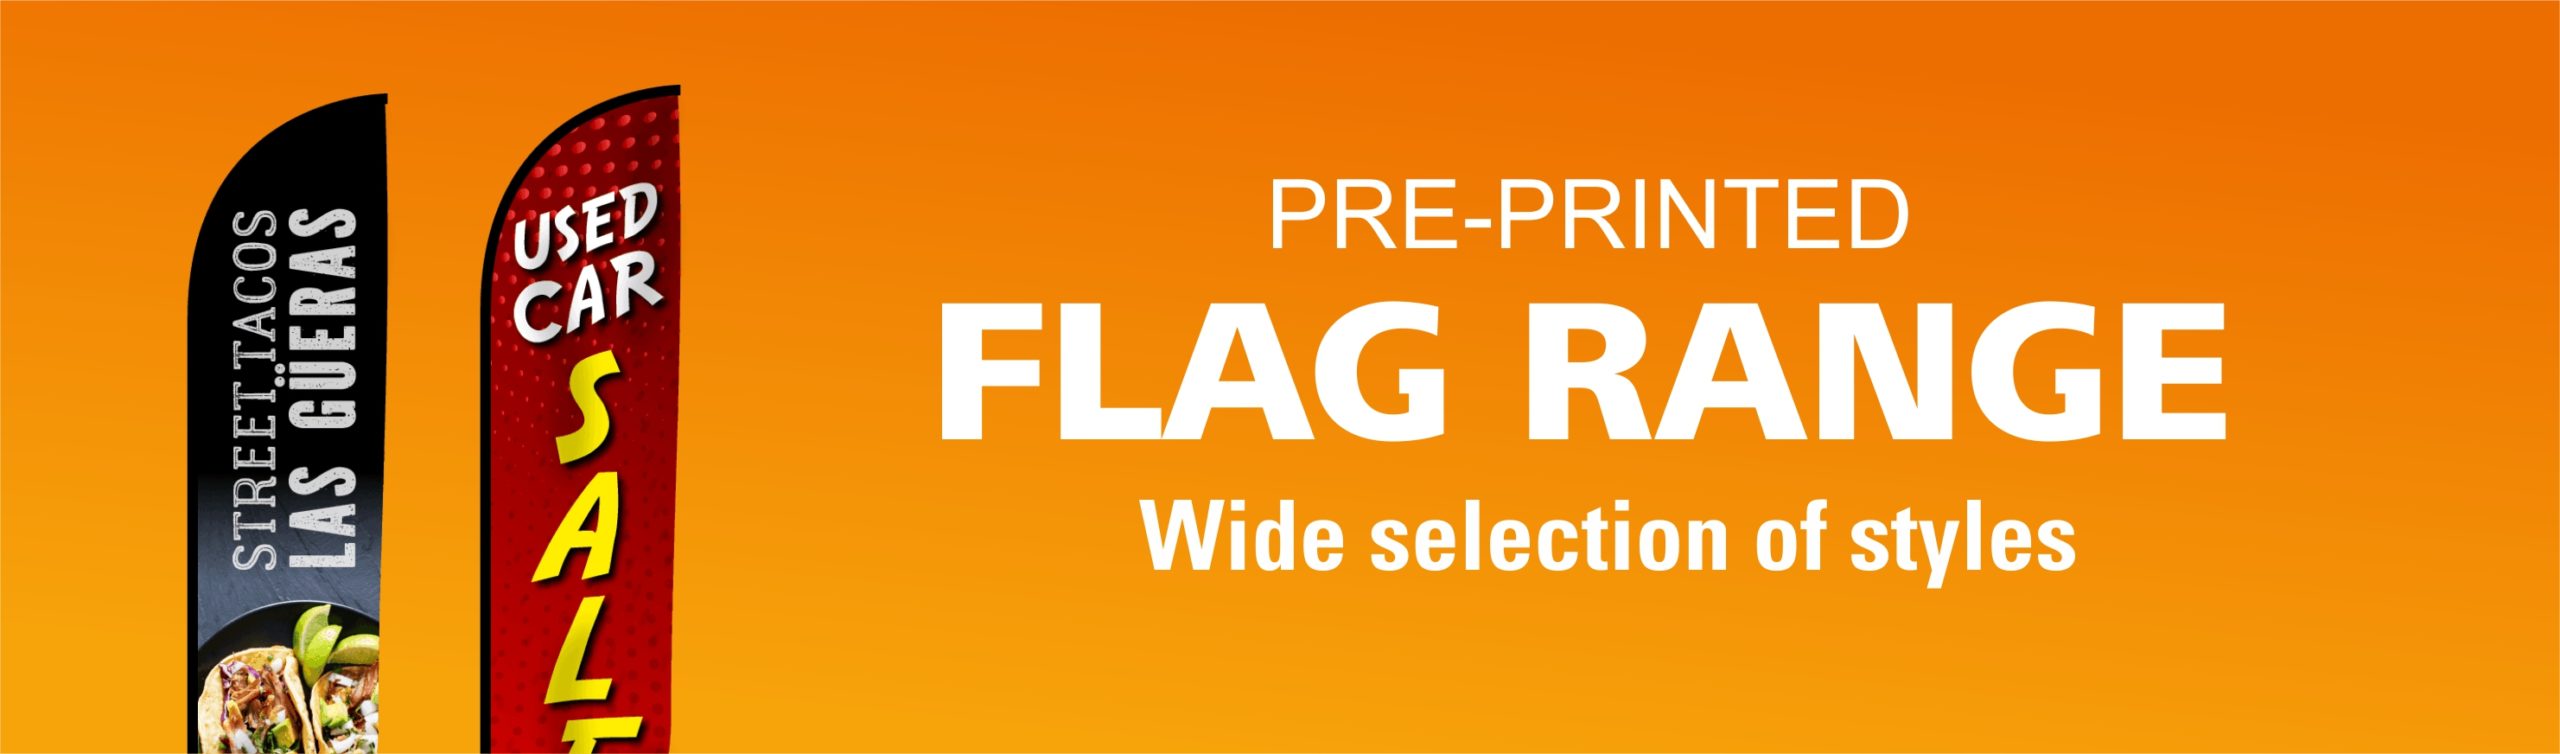 Pre-Printed Flags from $65